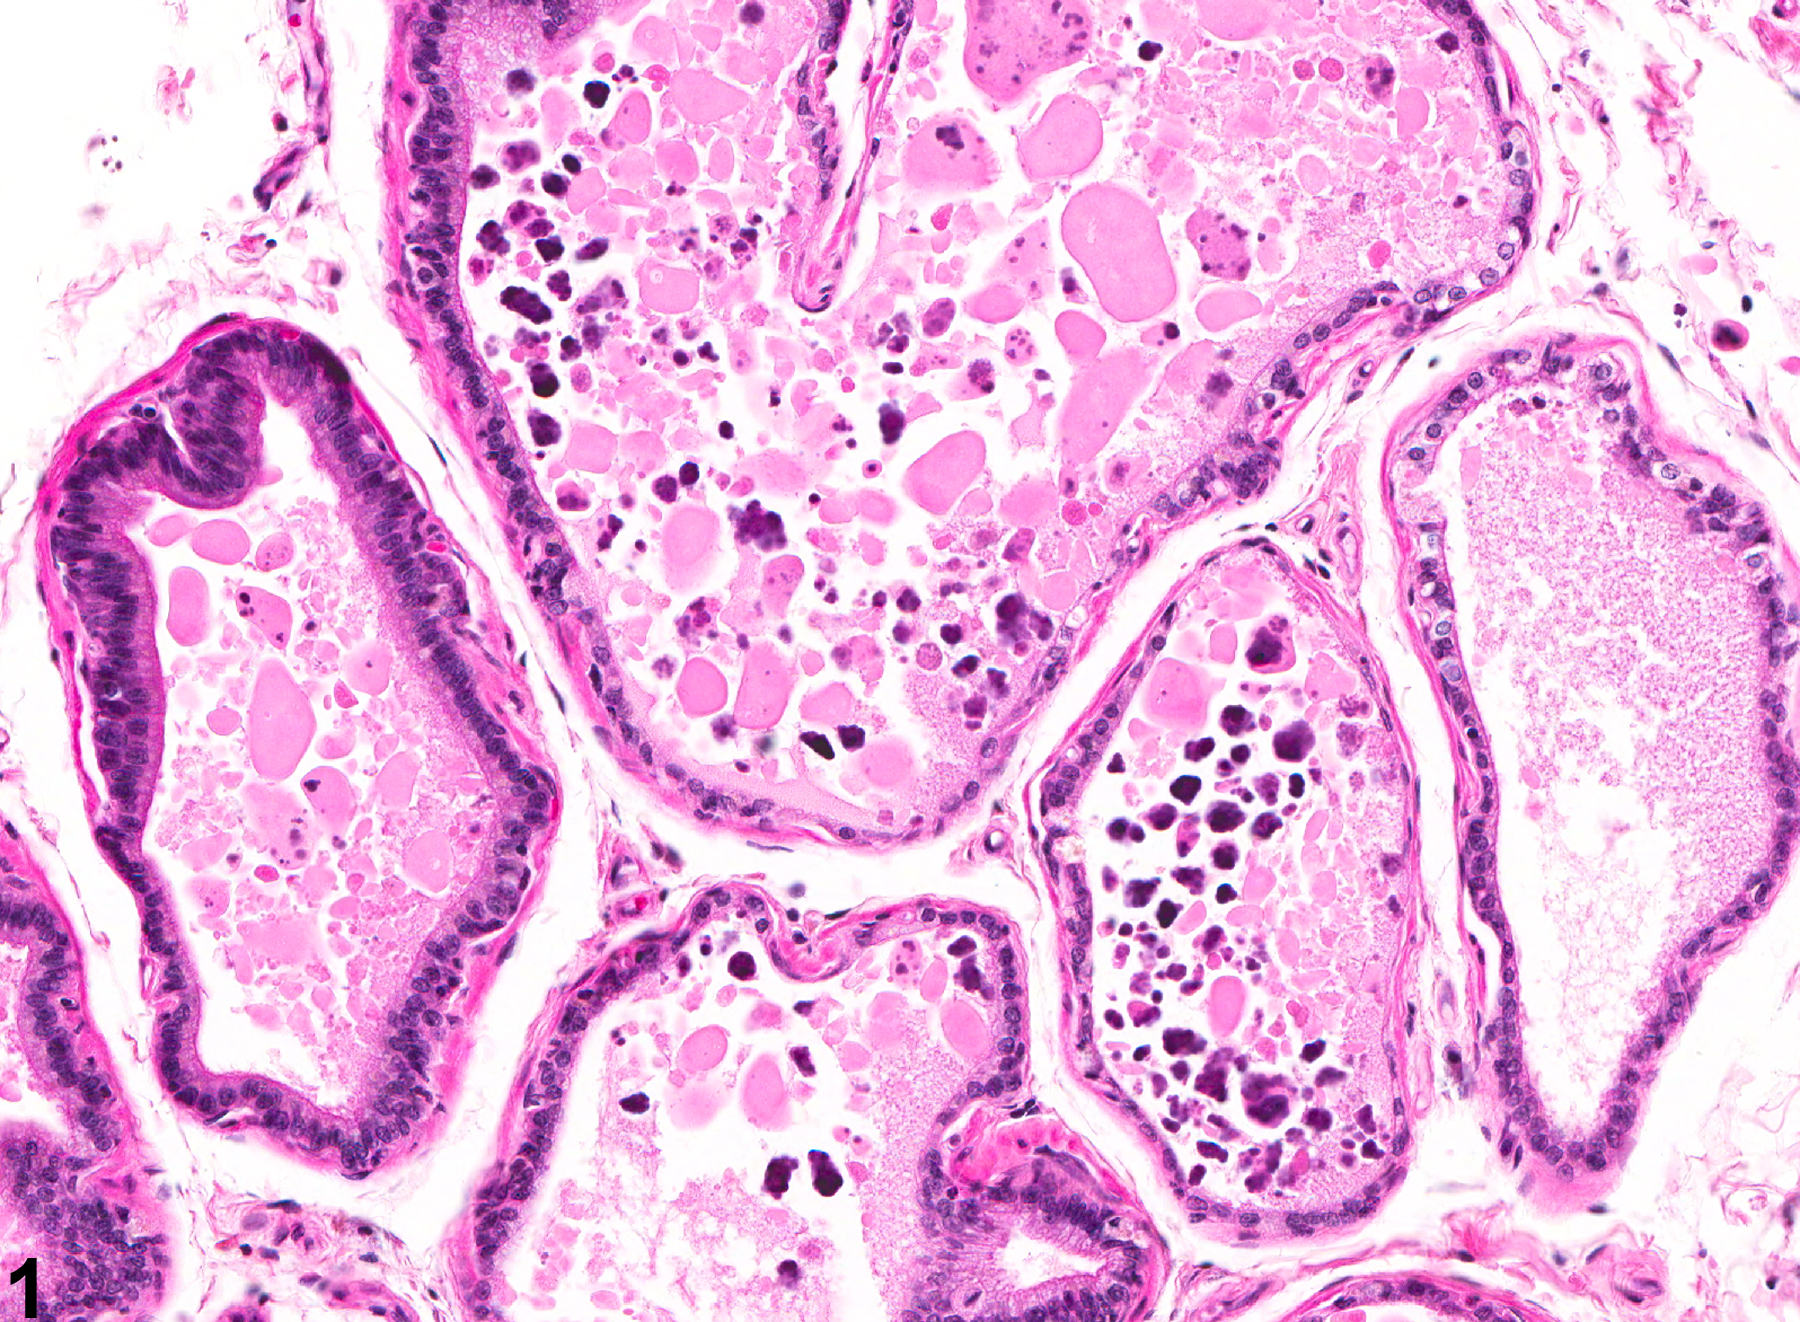 Image of acinar secretory alteration in the prostate from a male F344/N rat in a chronic study